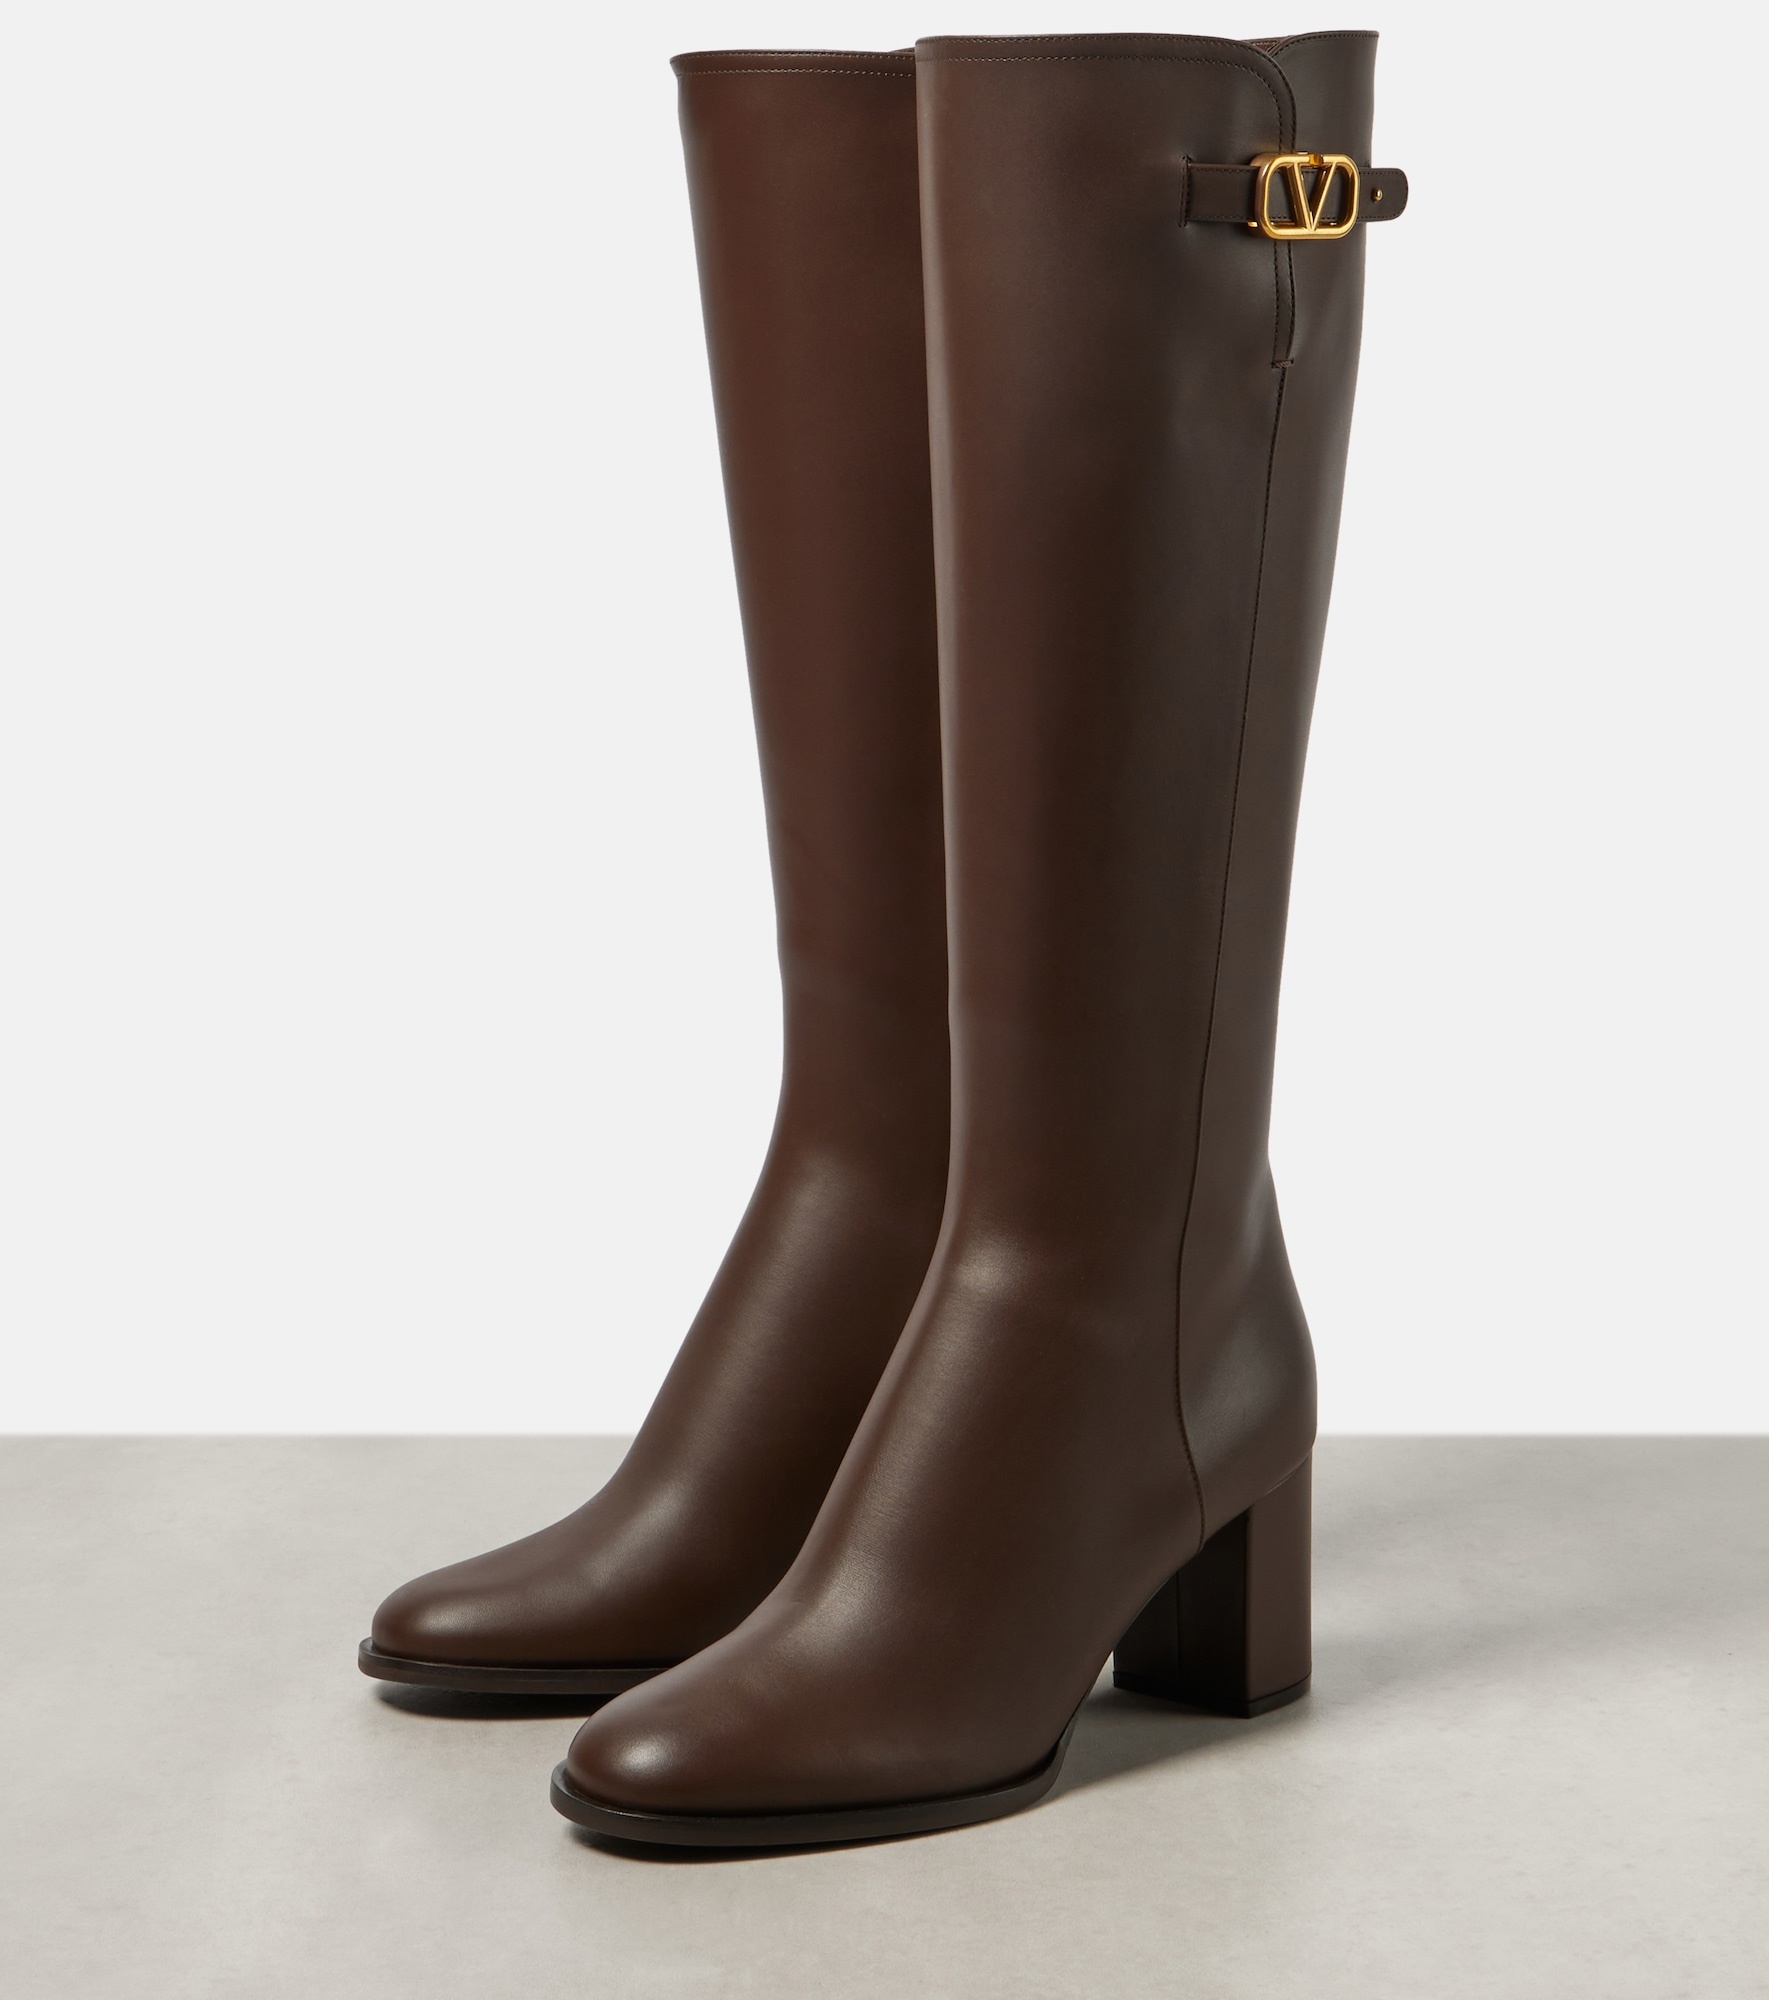 VLogo Signature leather knee-high boots - 5